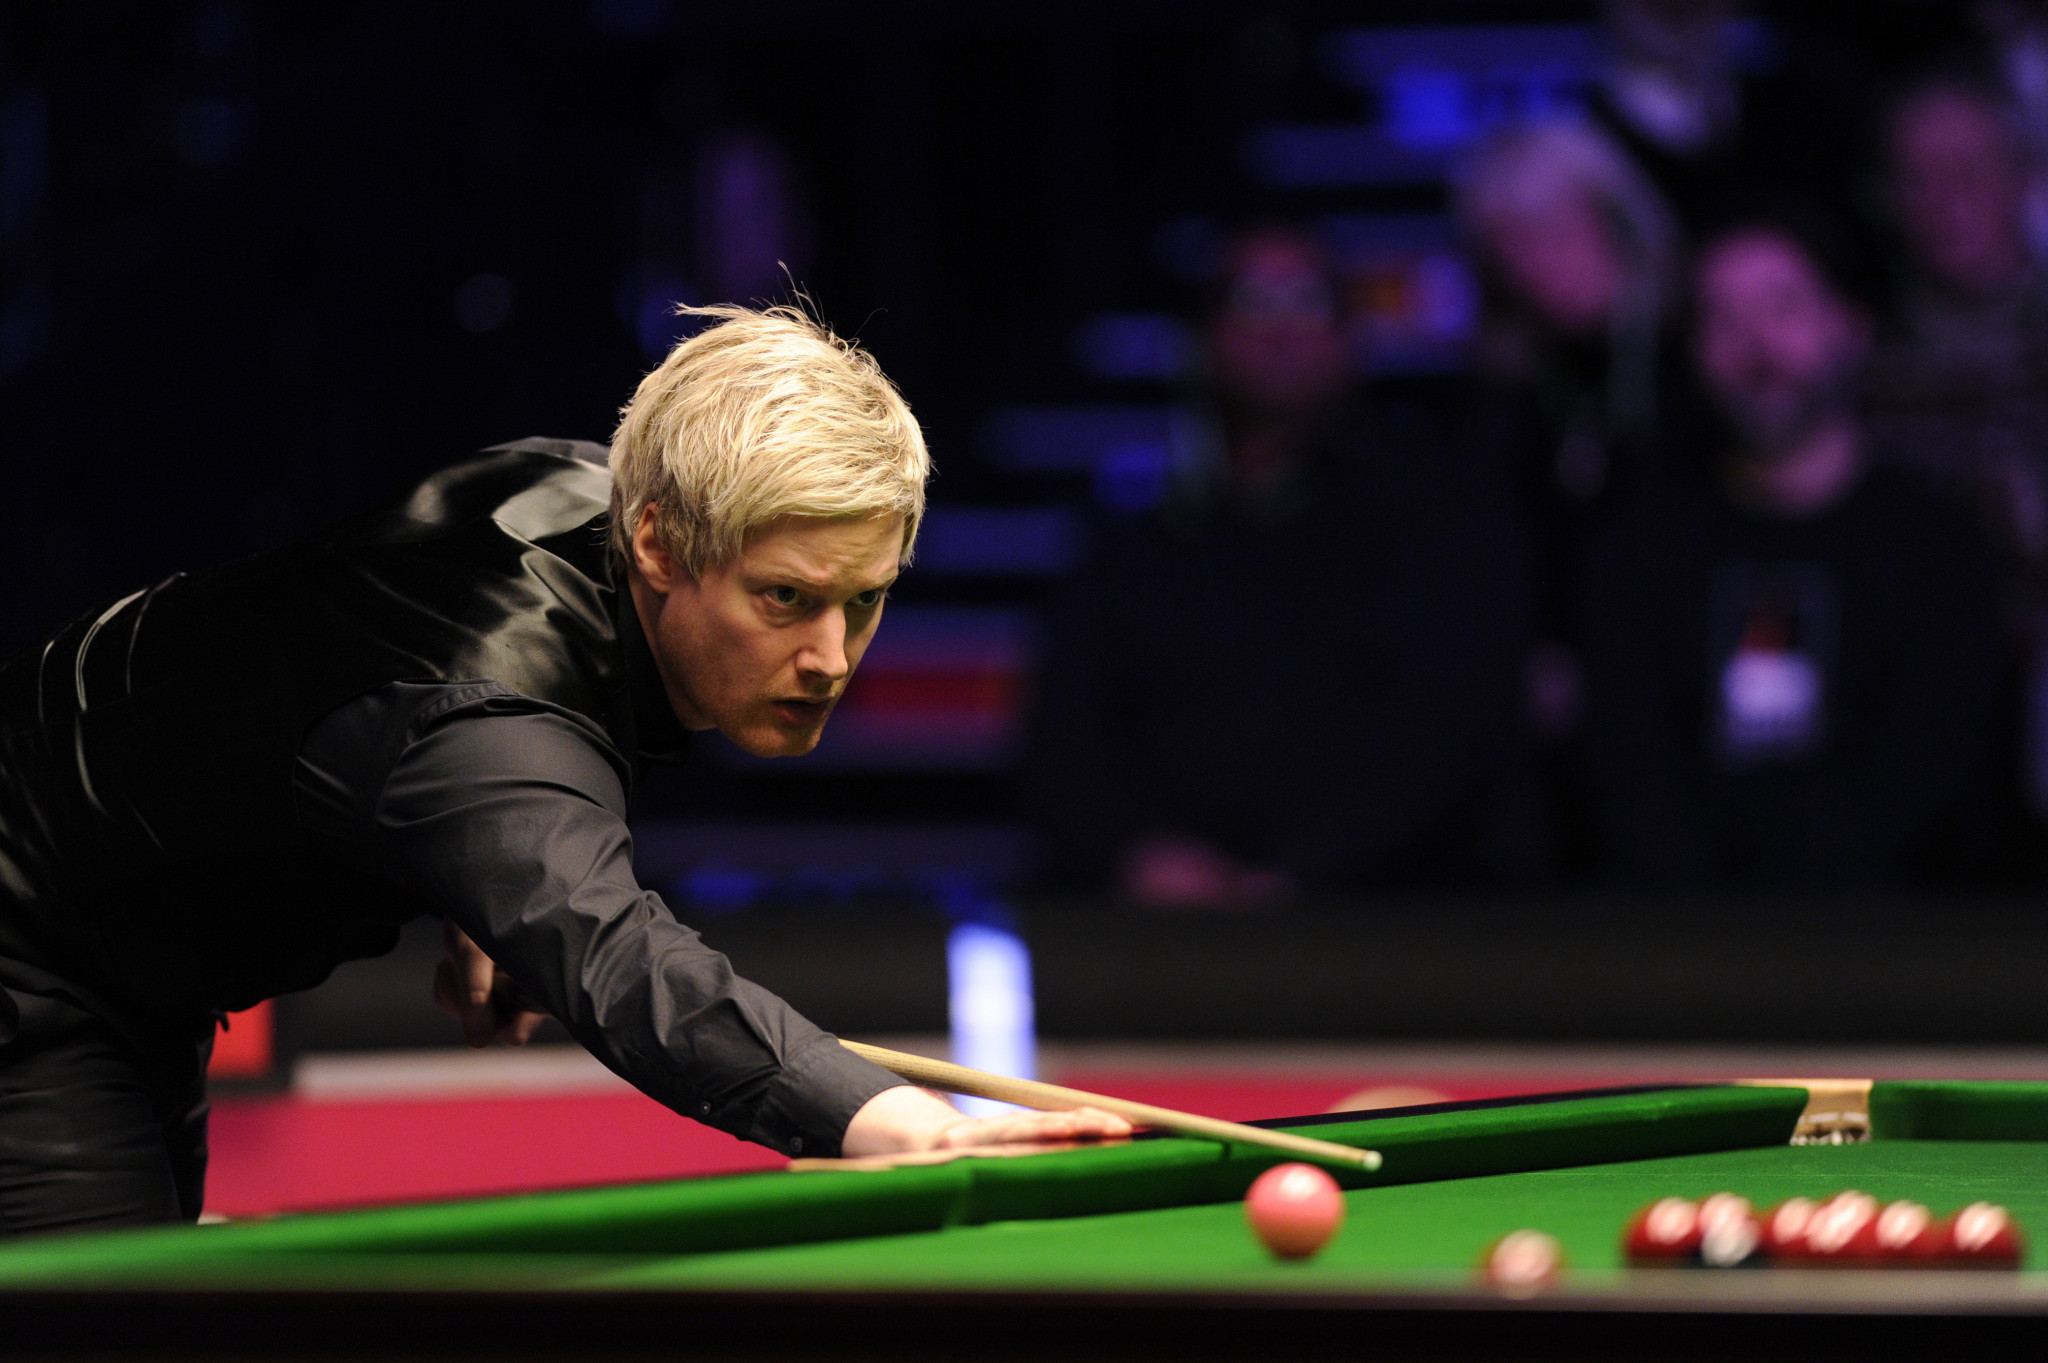 Australia's Neil Robertson became the first player to reach the quarter-finals ©Getty Images